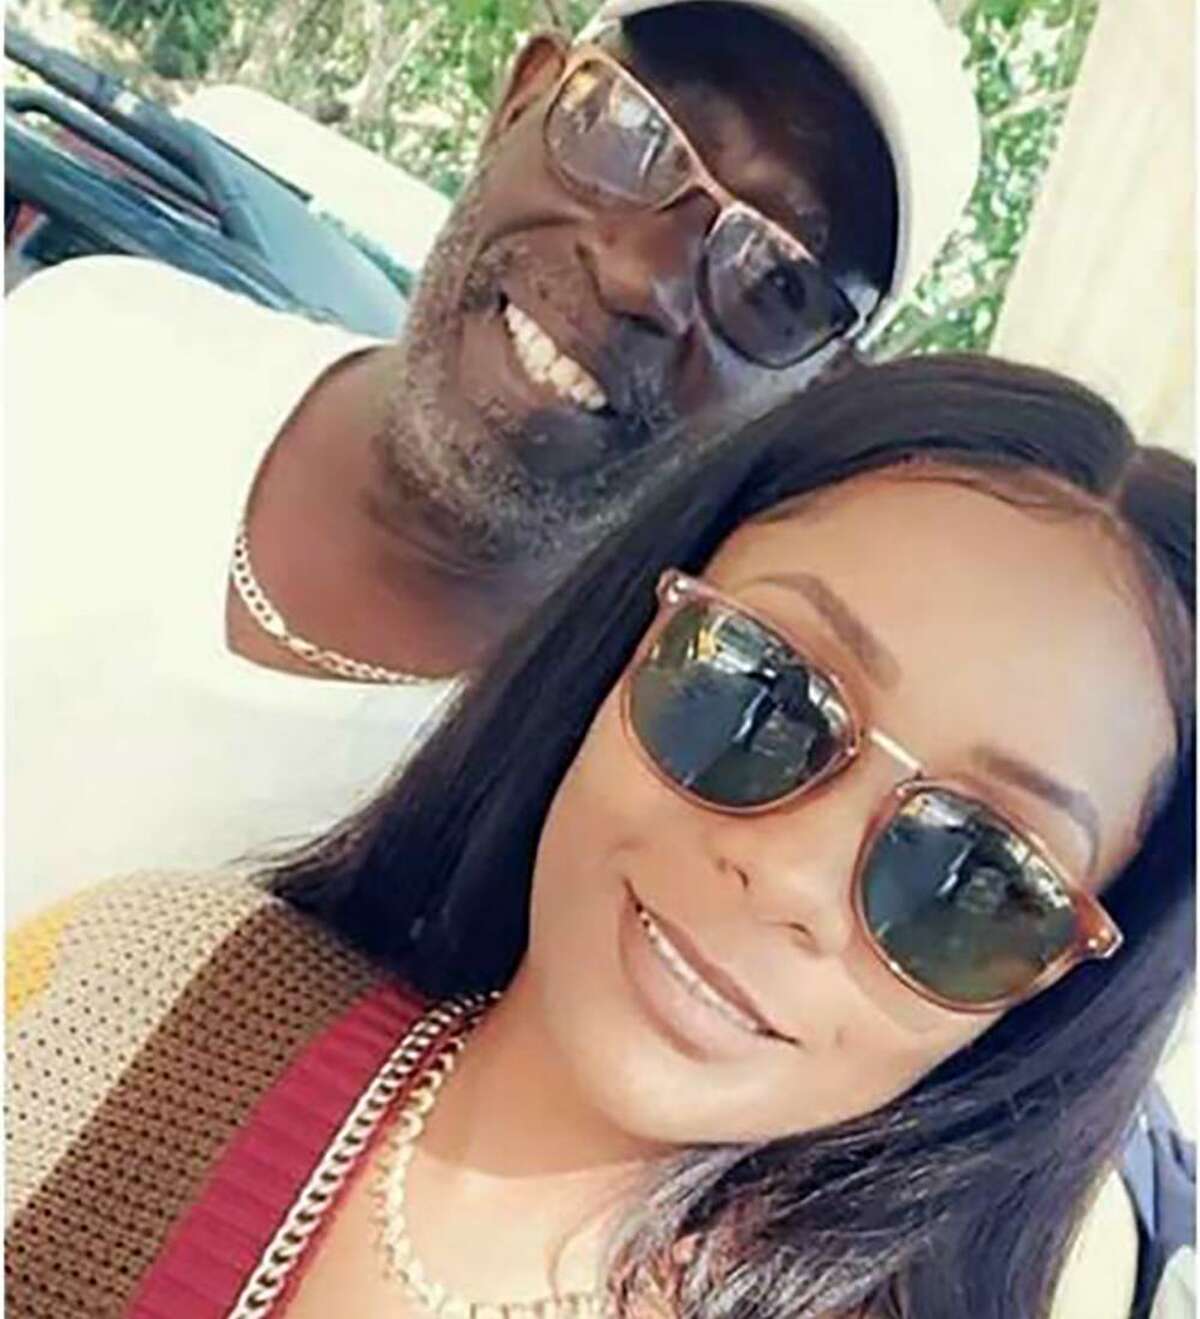 Everton “Beachy Stout” McDonald is pictured with his second wife, Tonia Hamilton-McDonald, whom he is accused of paying someone to kill in Jamaica in July 2020. McDonald is the father of Andre McDonald, who was sentenced Monday to 20 years for the February 2019 killing of his wife, Andreen McDonald, in northern Bexar County.